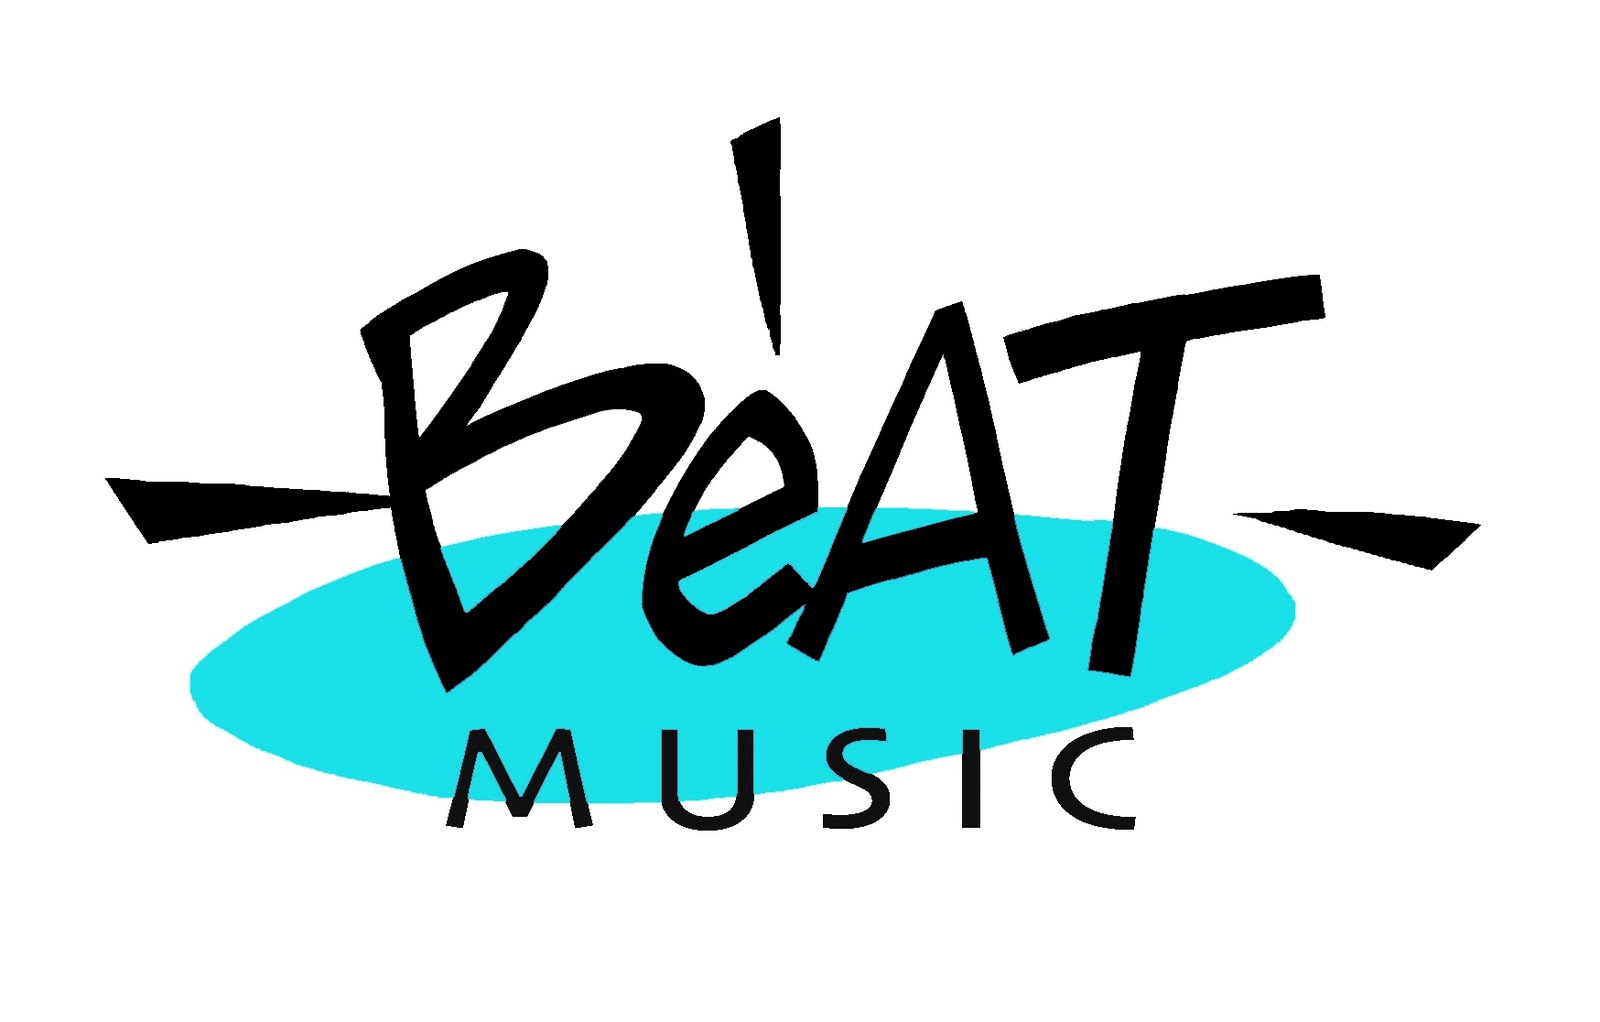 Musical beats. Beat in Music. Pingw!n Beat Music. Musical Beat sinonime. 1/3 Beat in to the Music.